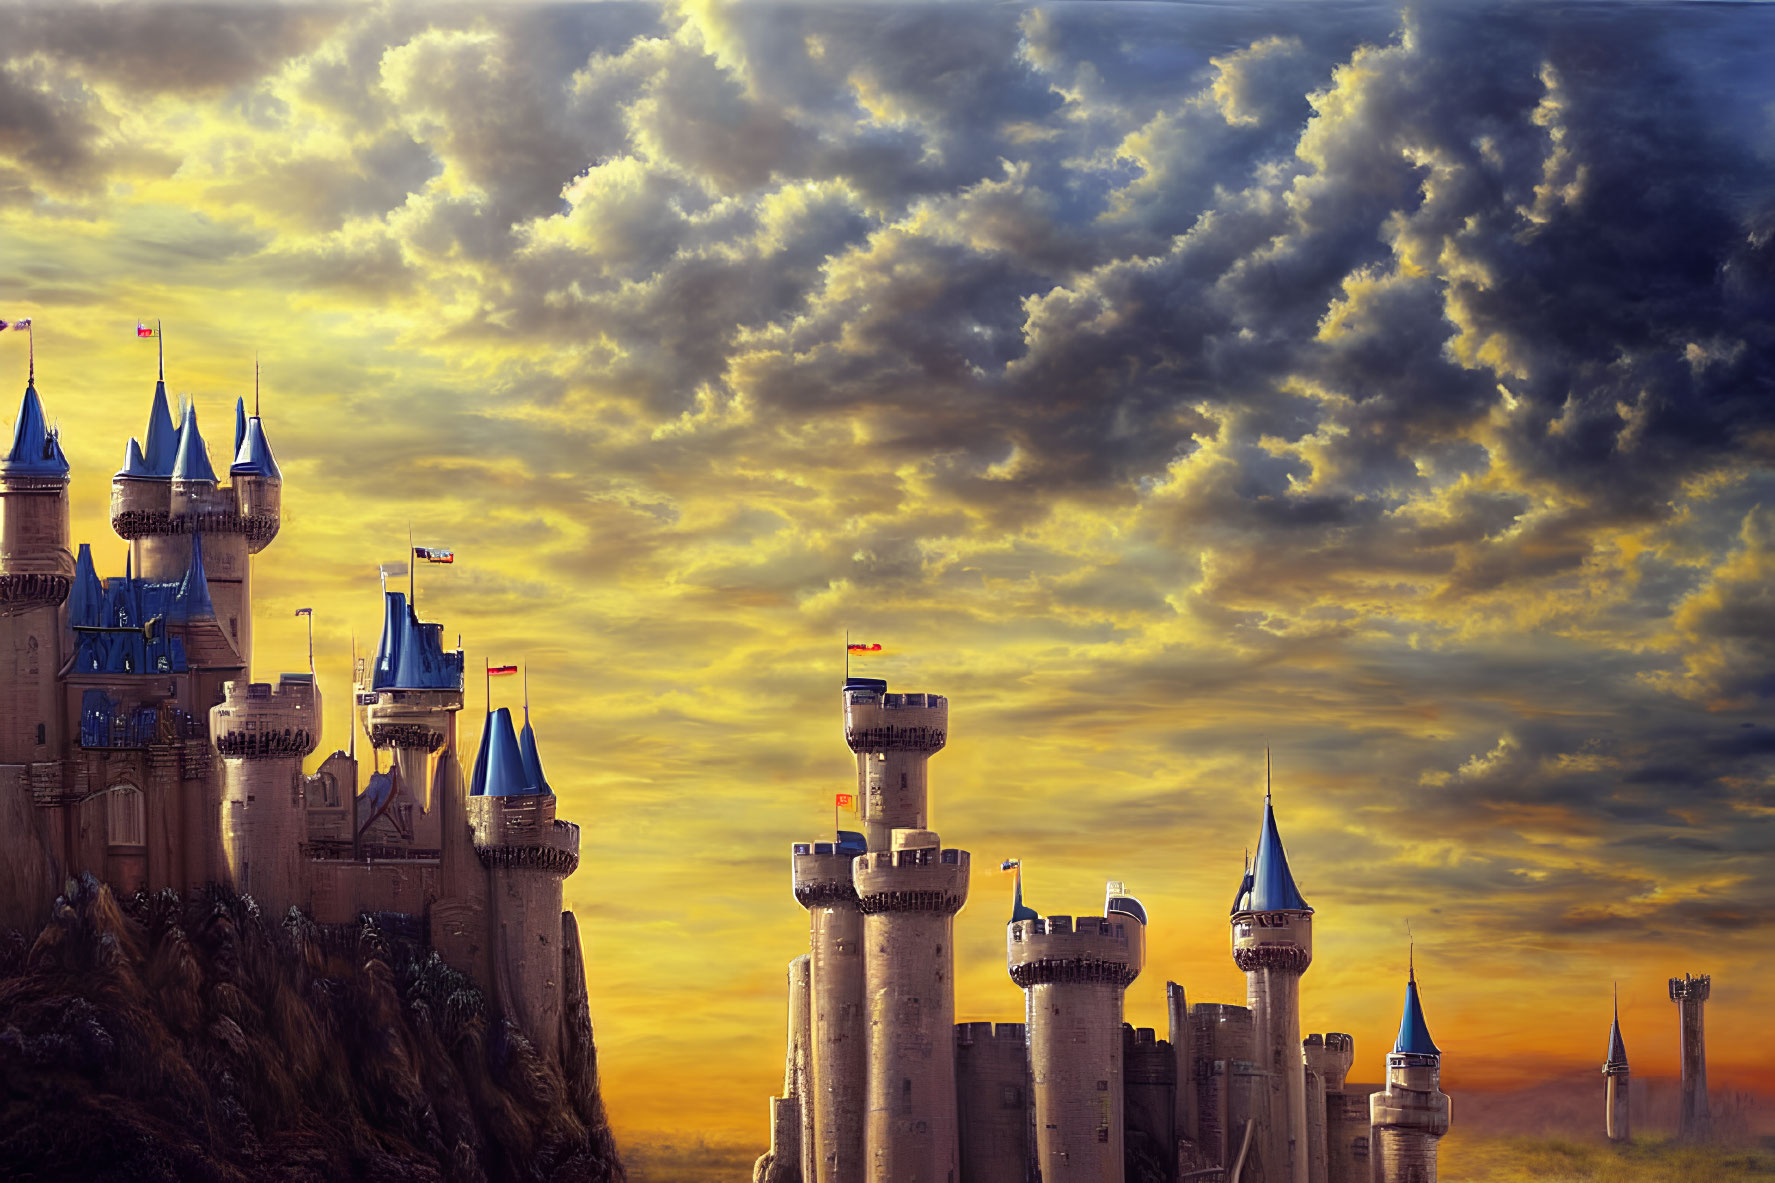 Majestic castle with multiple towers under golden sunset sky